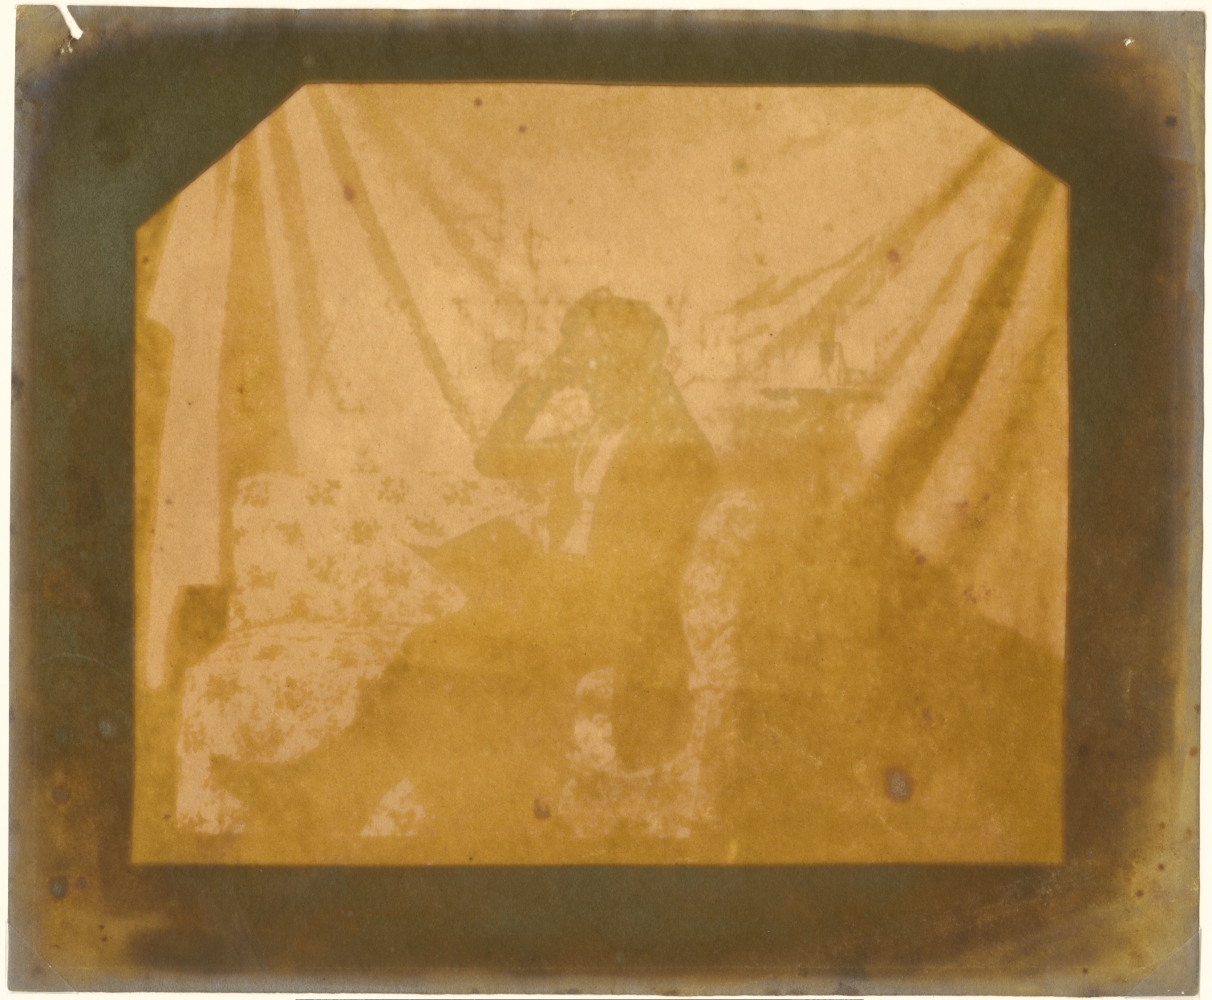 William Henry Fox Talbot&nbsp;(English, 1800-1877), Nicolaas Henneman reading on a couch, 2 October 1841